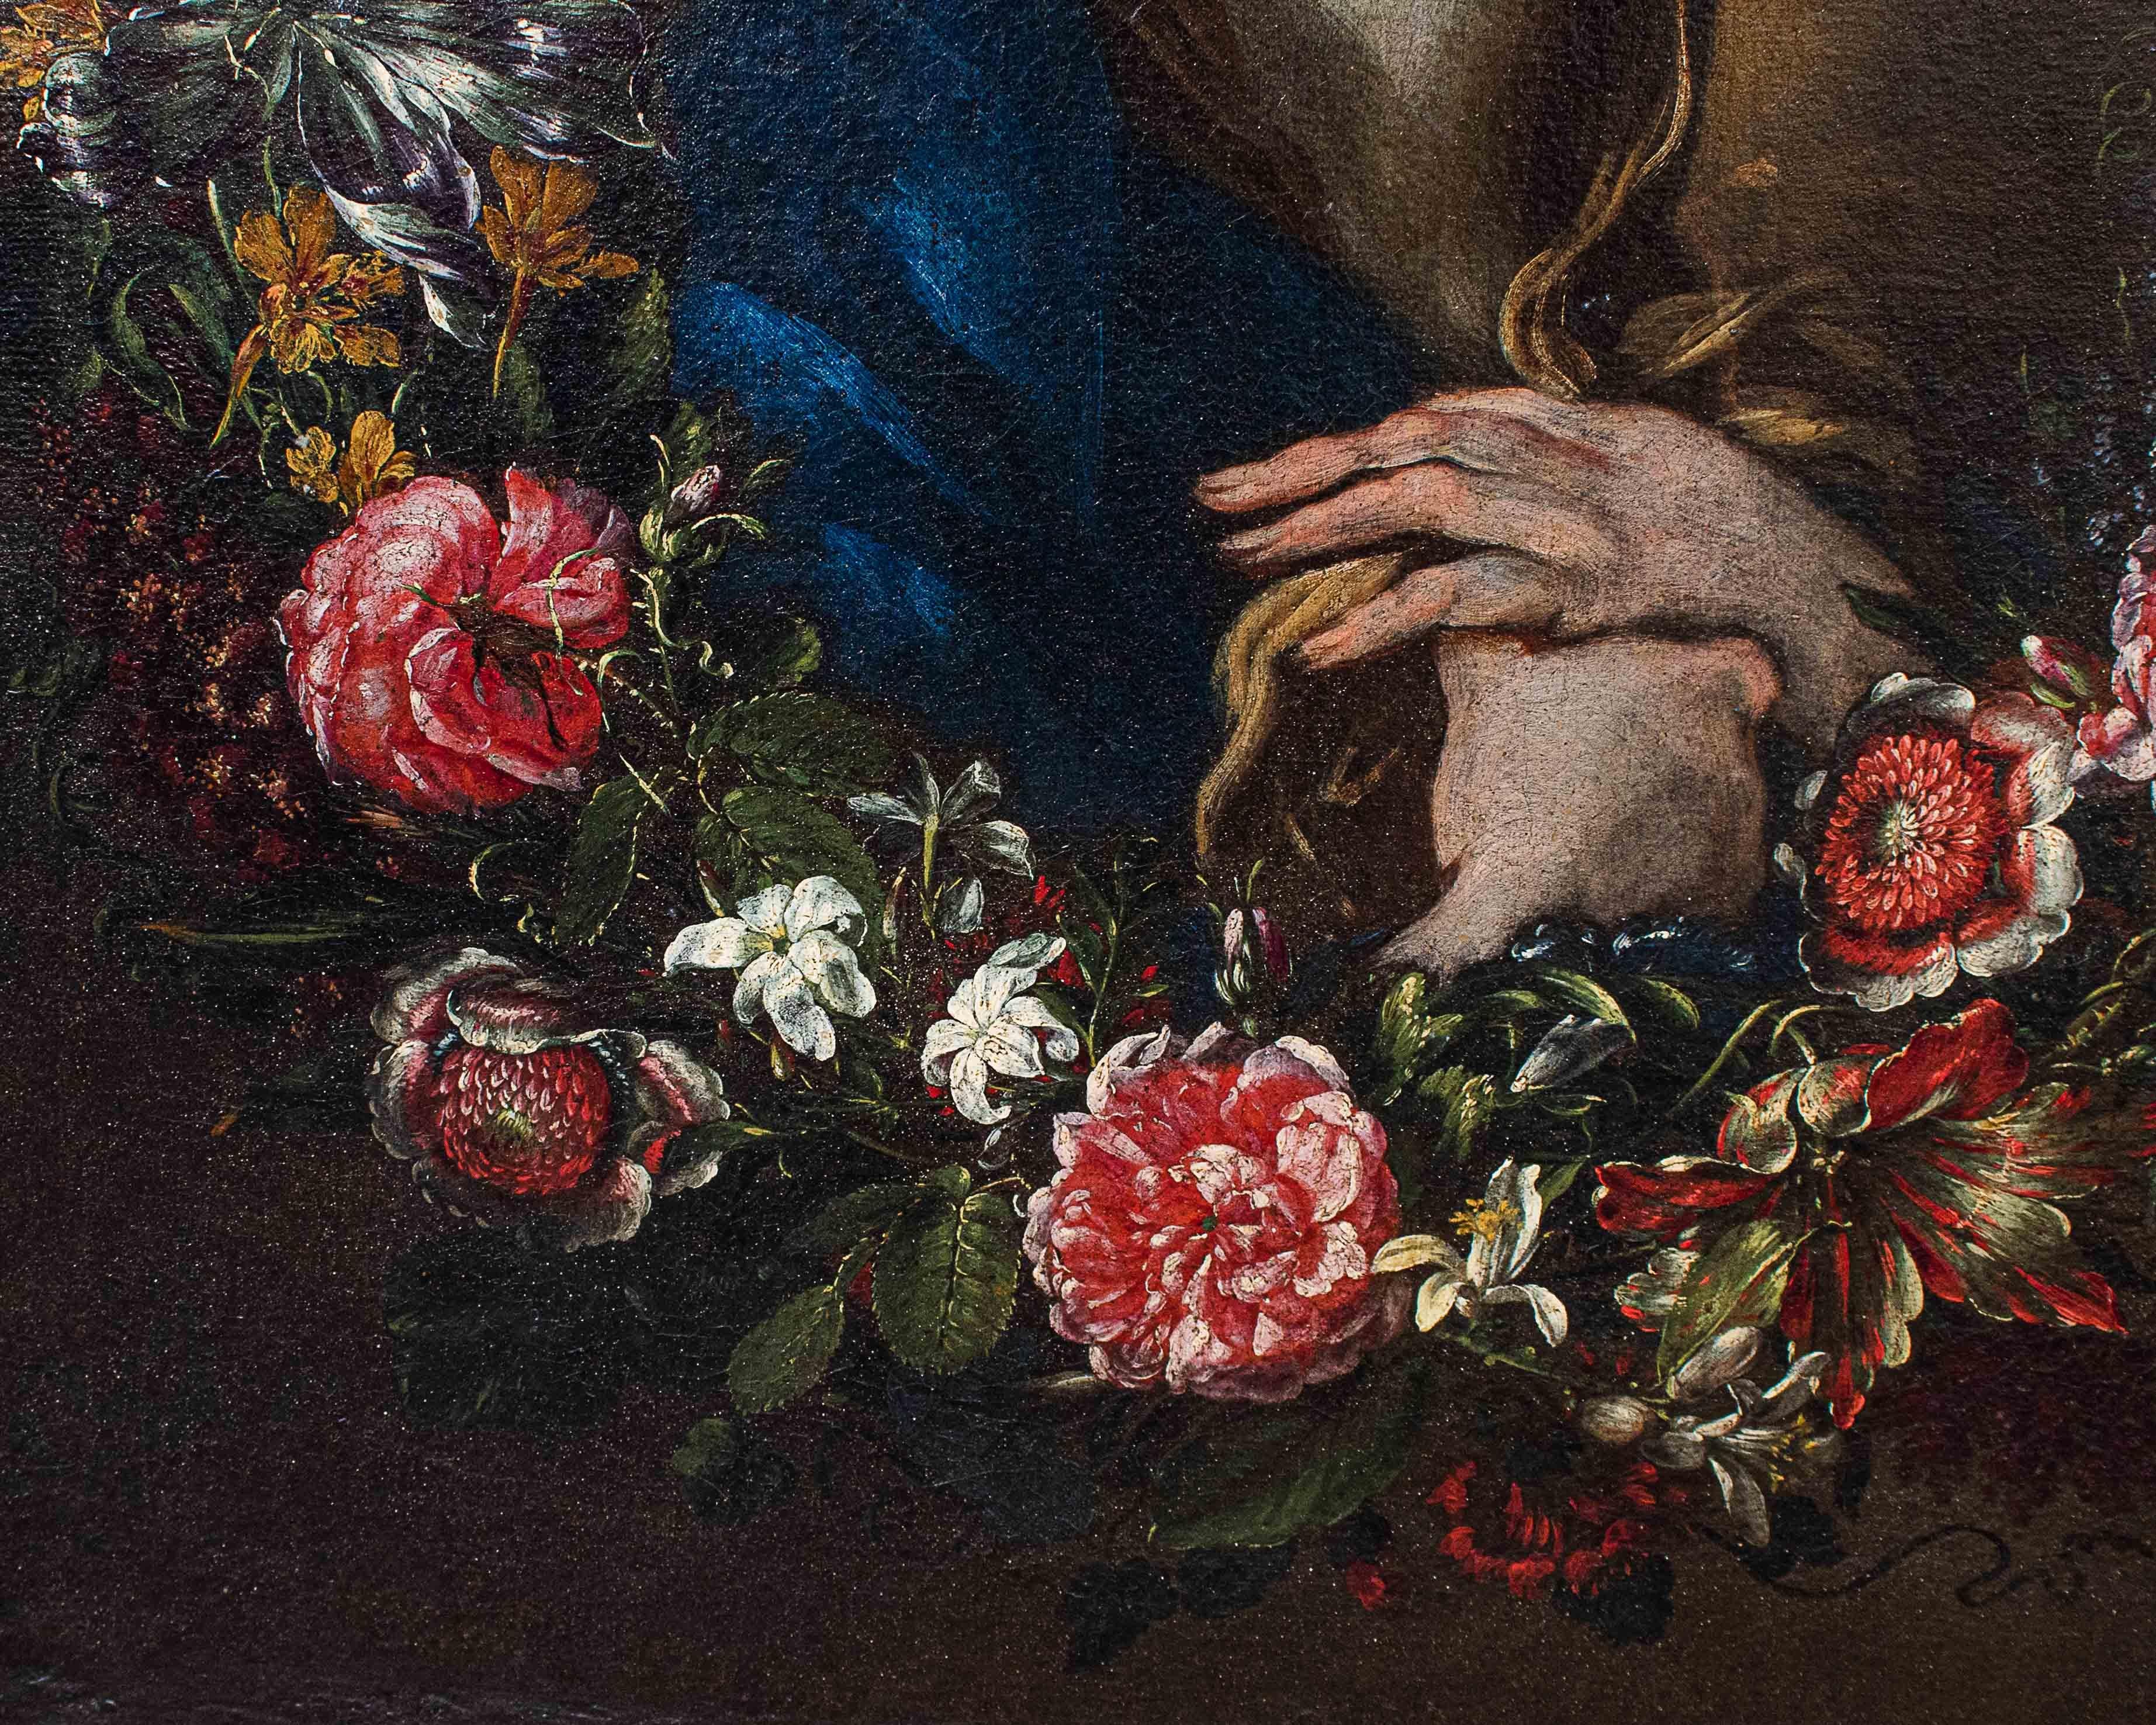 17th-18th Century Virgin with in Garland of Flowers Painting Oil on Canvas 5